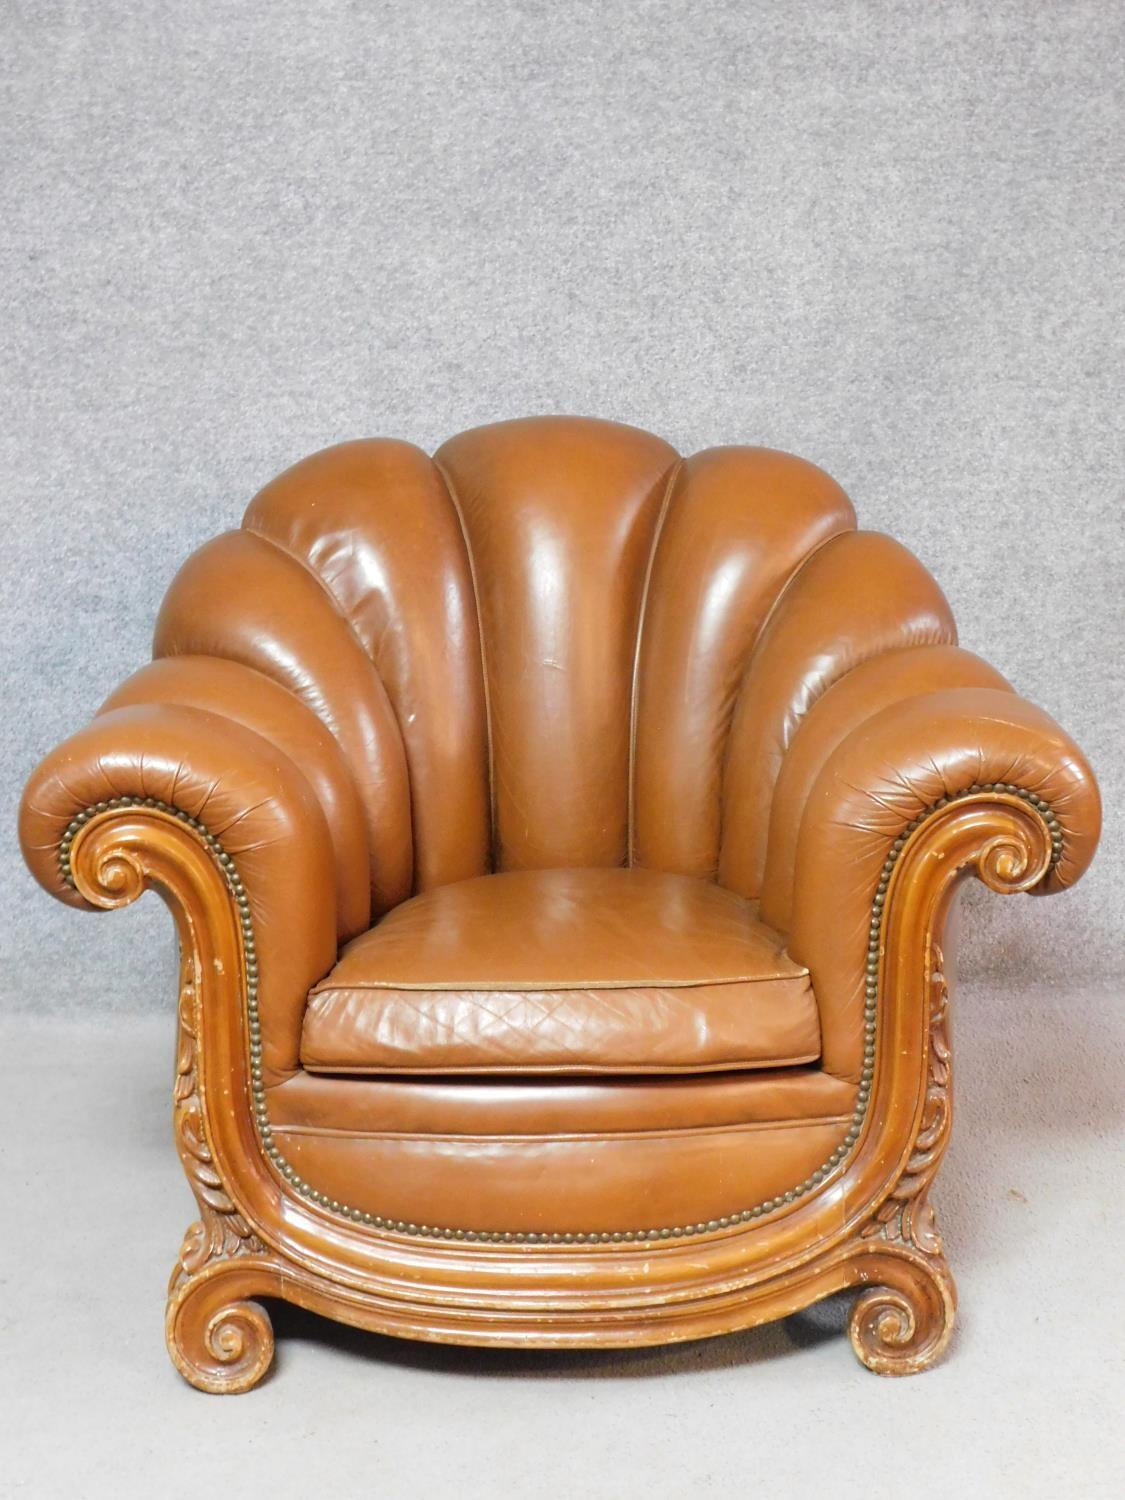 A pair of Italian walnut framed Arredo style armchairs in tan leather scalloped upholstery. H.80 W. - Image 3 of 5